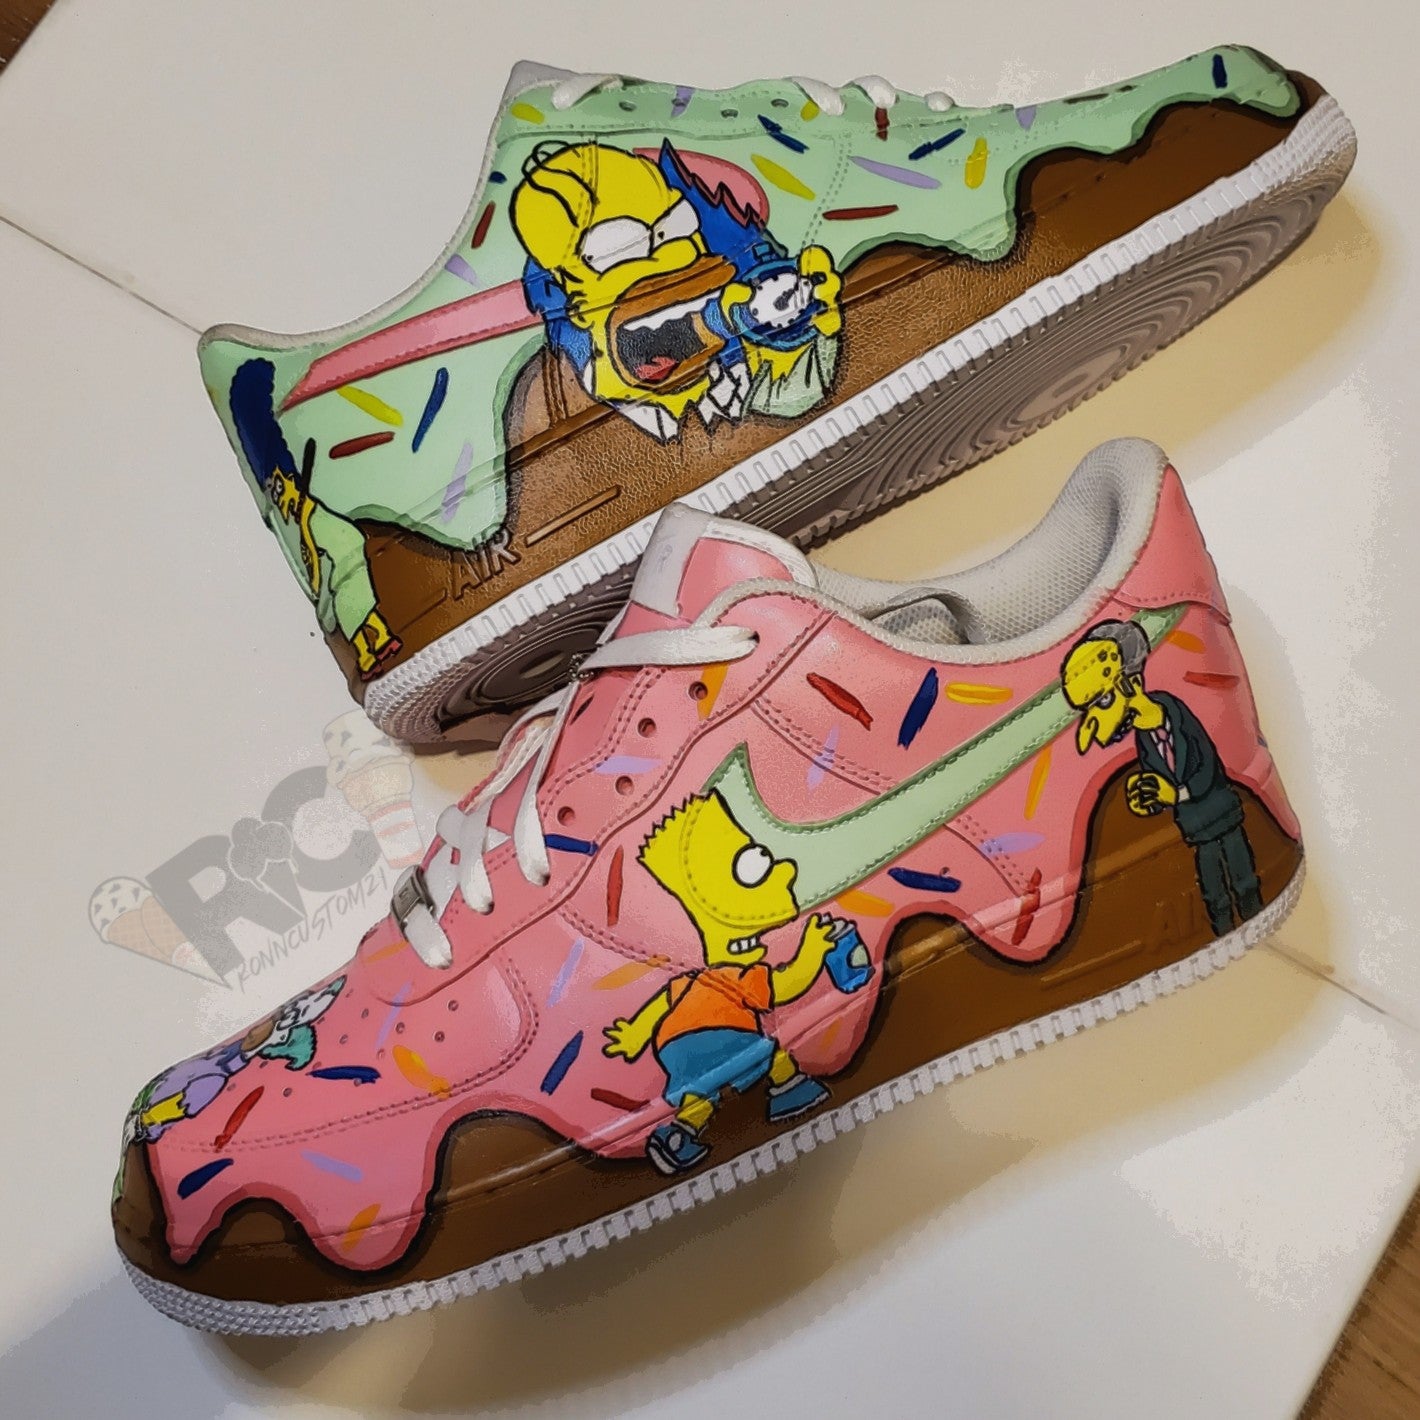 simpsons air force 1s